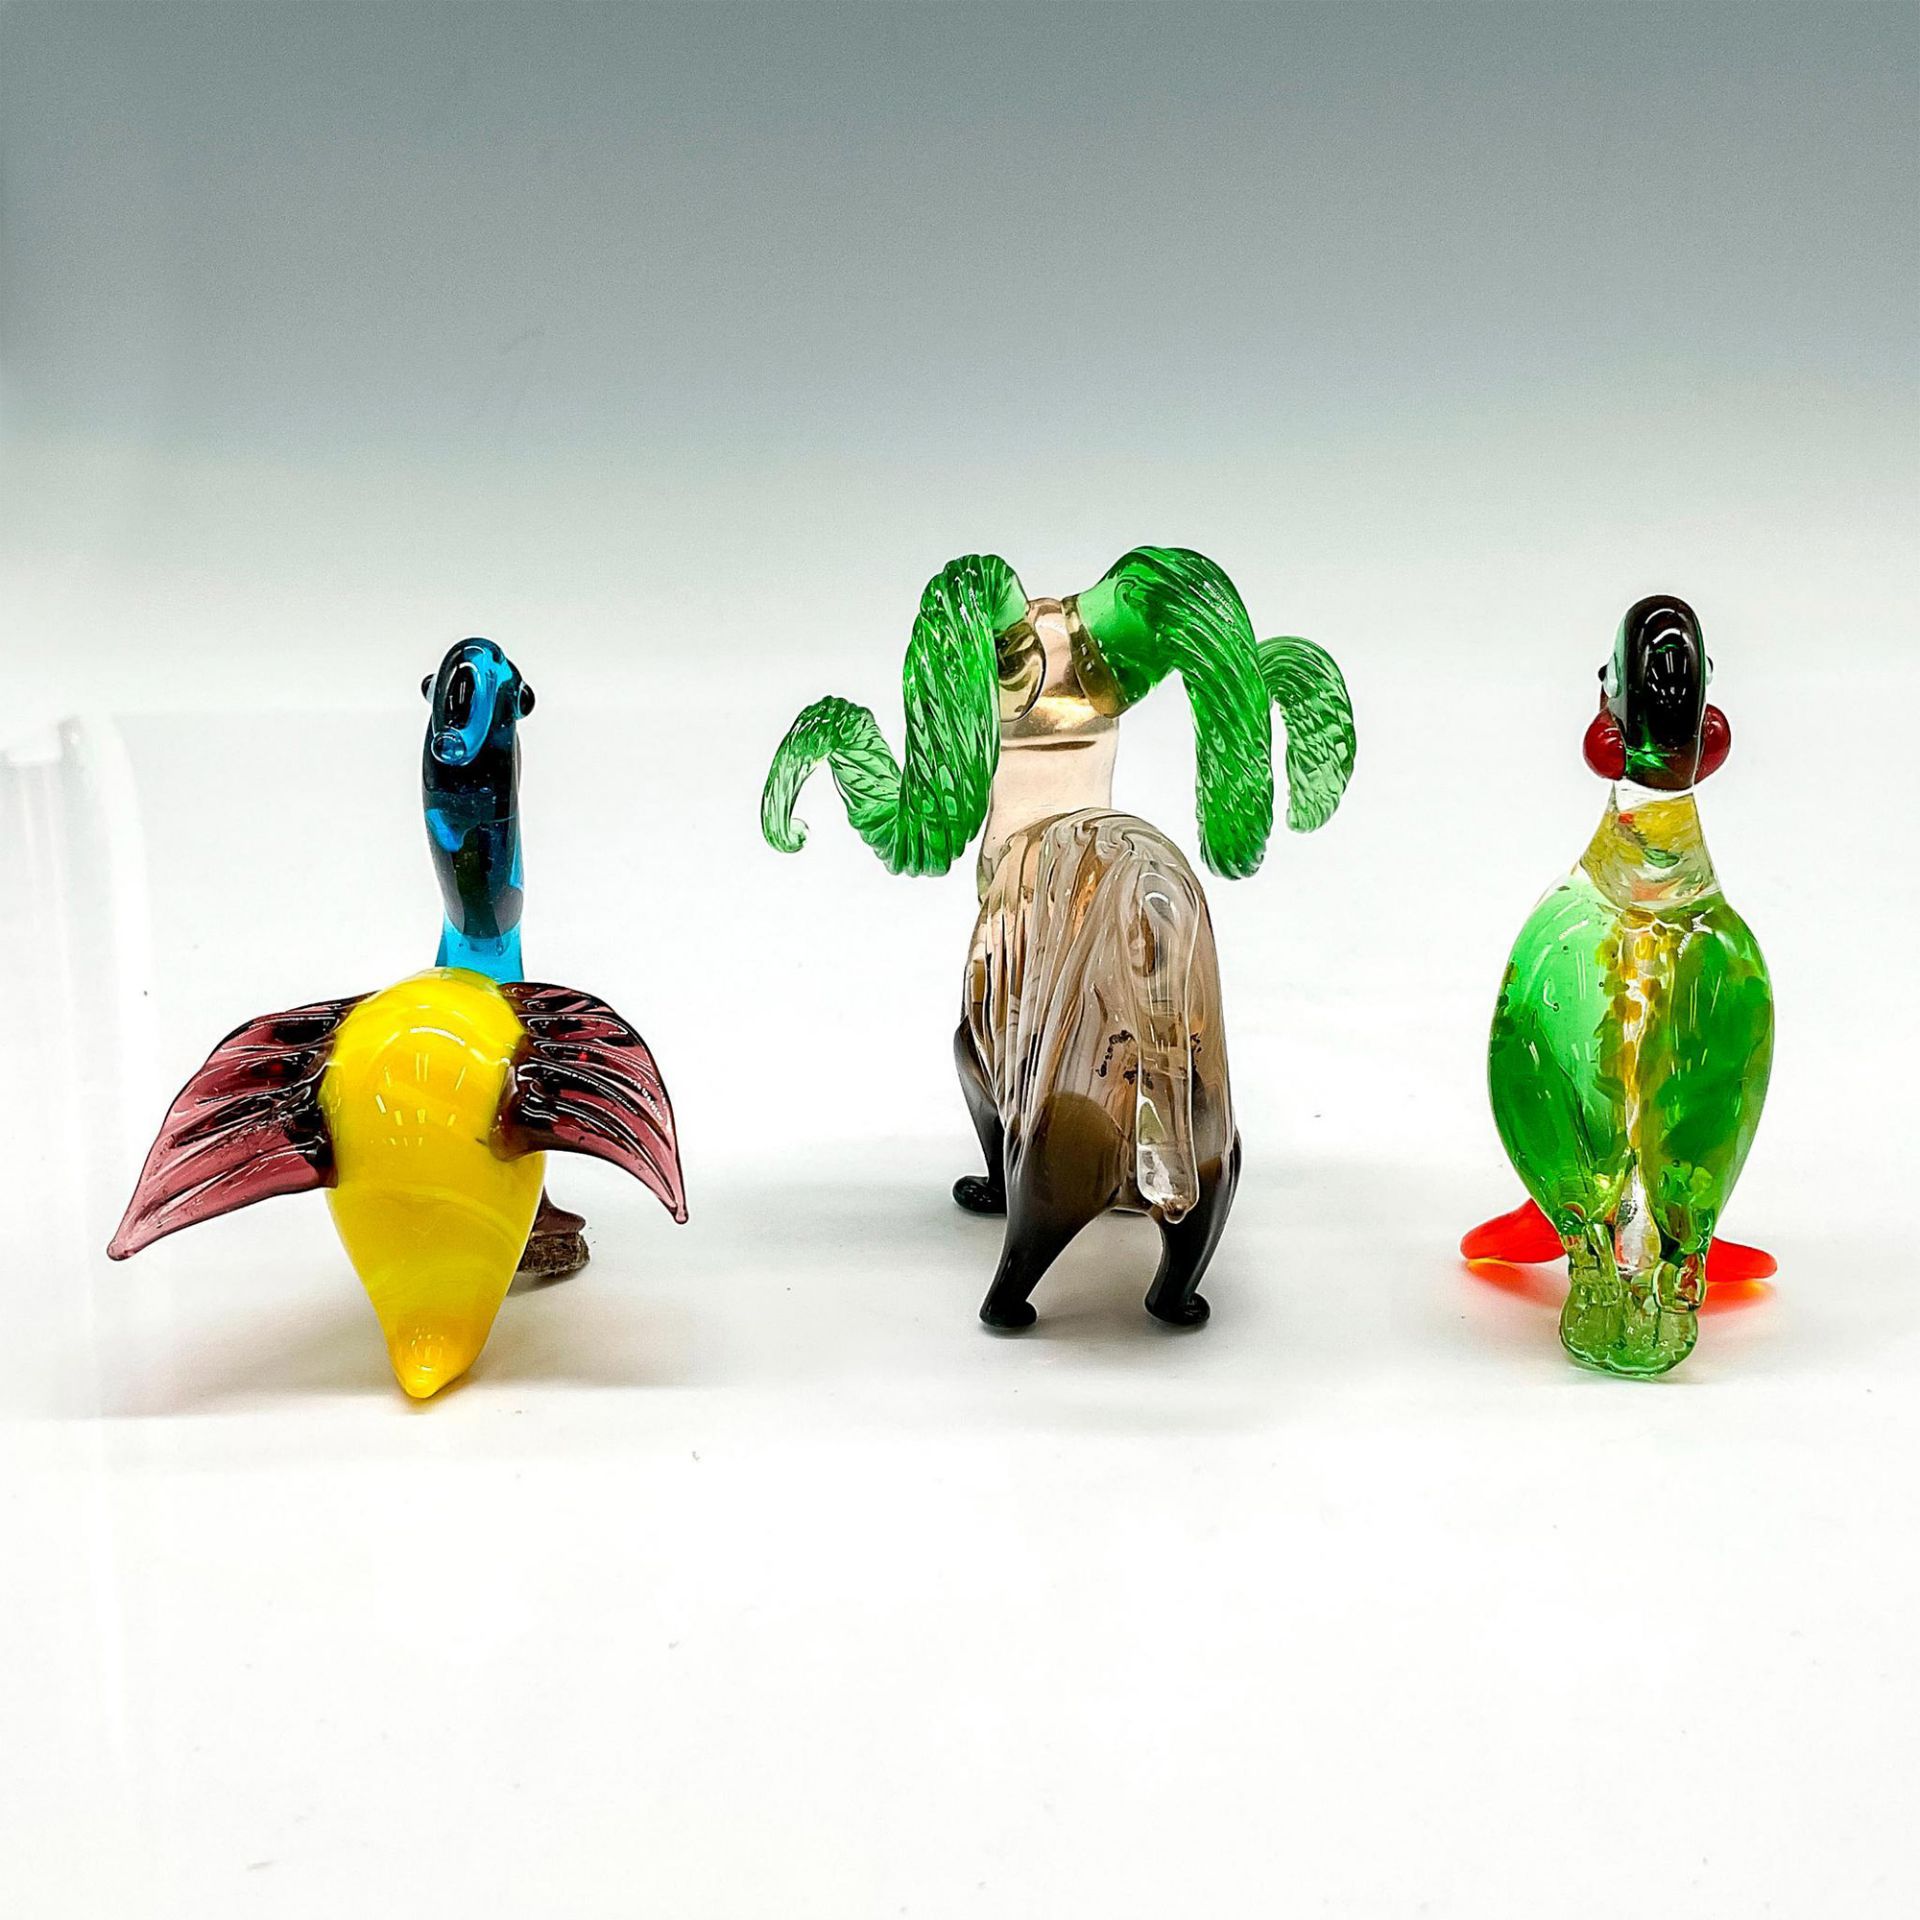 3pc Hand-blown Art Glass Figurines - Image 2 of 3